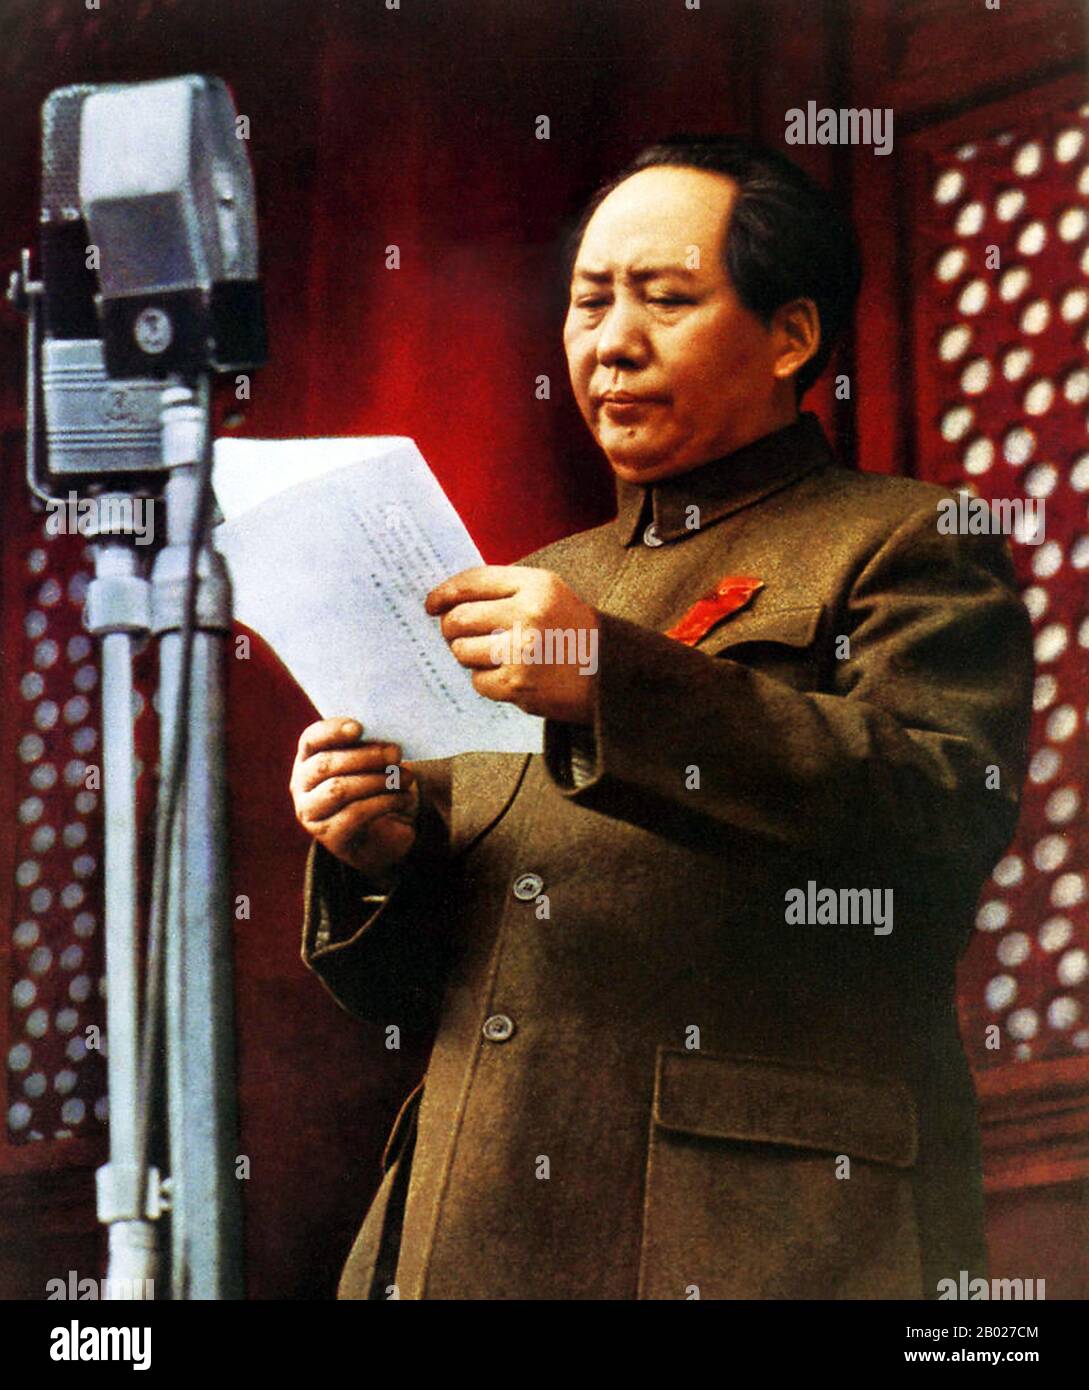 The modern Chinese tunic suit is a style of male attire known in China as the Zhongshan suit (simplified Chinese: 中山装; traditional Chinese: 中山裝; pinyin: Zhōngshān zhuāng) (after Sun Yat-Sen), also known in the West as the Mao suit (after Mao Zedong). Sun Yat-sen introduced the style shortly after the founding of the Republic of China as a form of national dress although with a distinctly political and later governmental implication.  After the end of the Chinese Civil War and the establishment of the People's Republic of China in 1949, the suit became widely worn by males and government leader Stock Photo